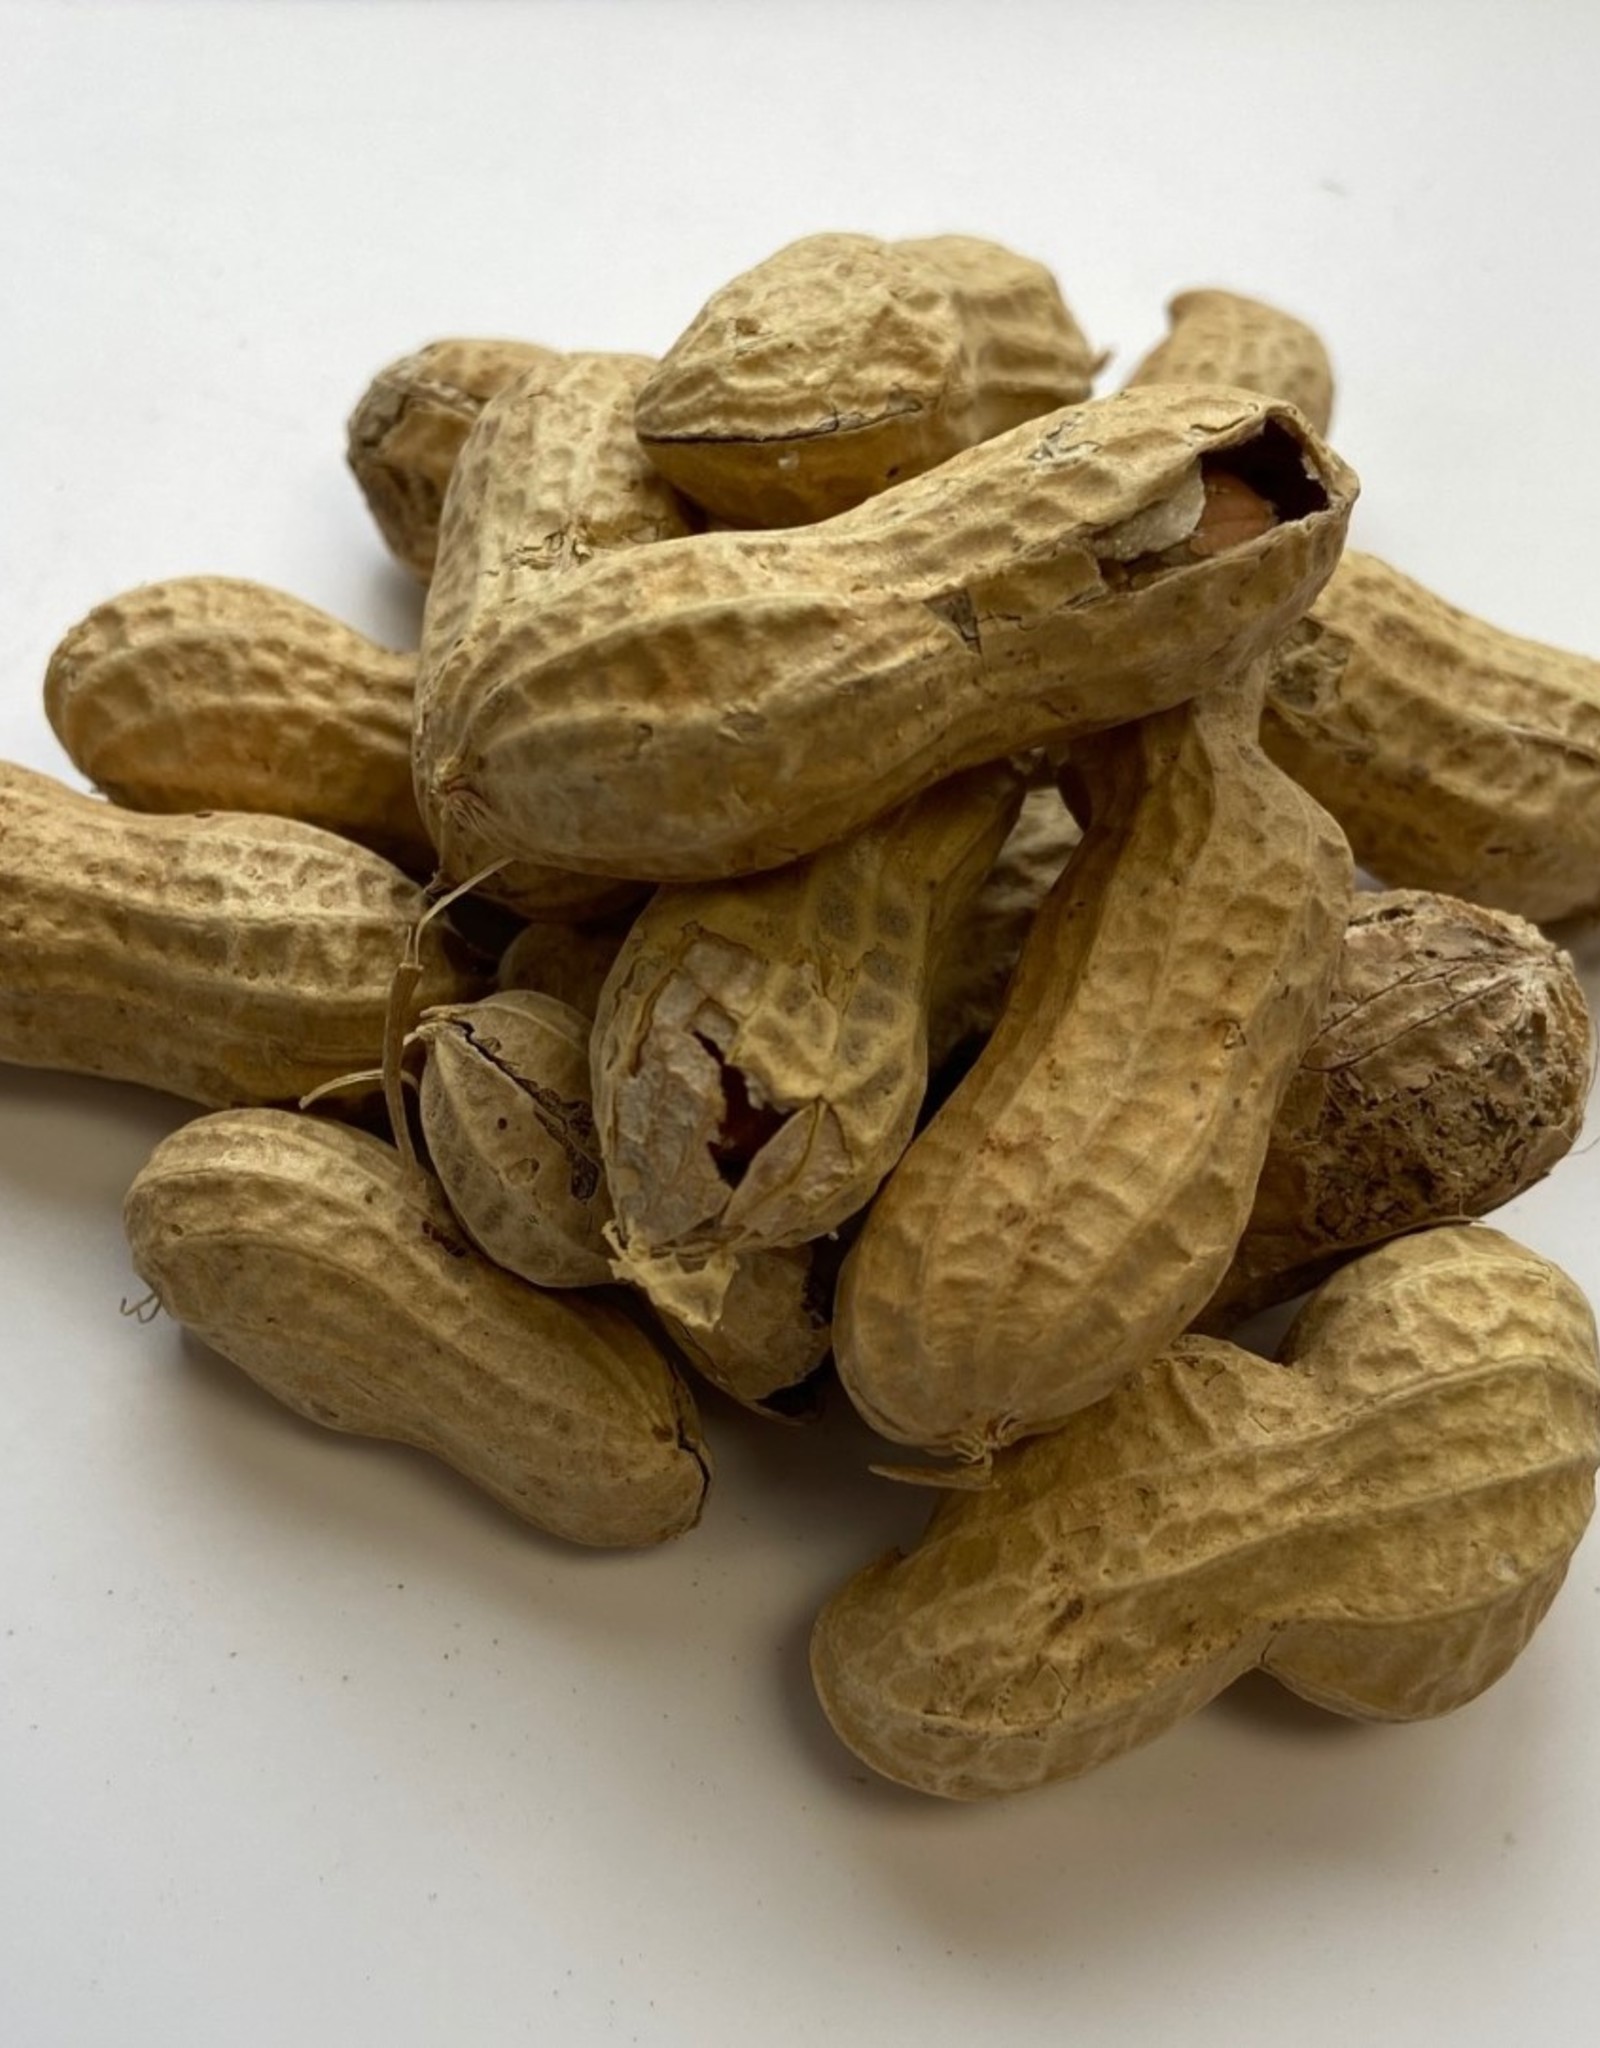 UNBRANDED PEANUTS RAW IN SHELL 50 LBS